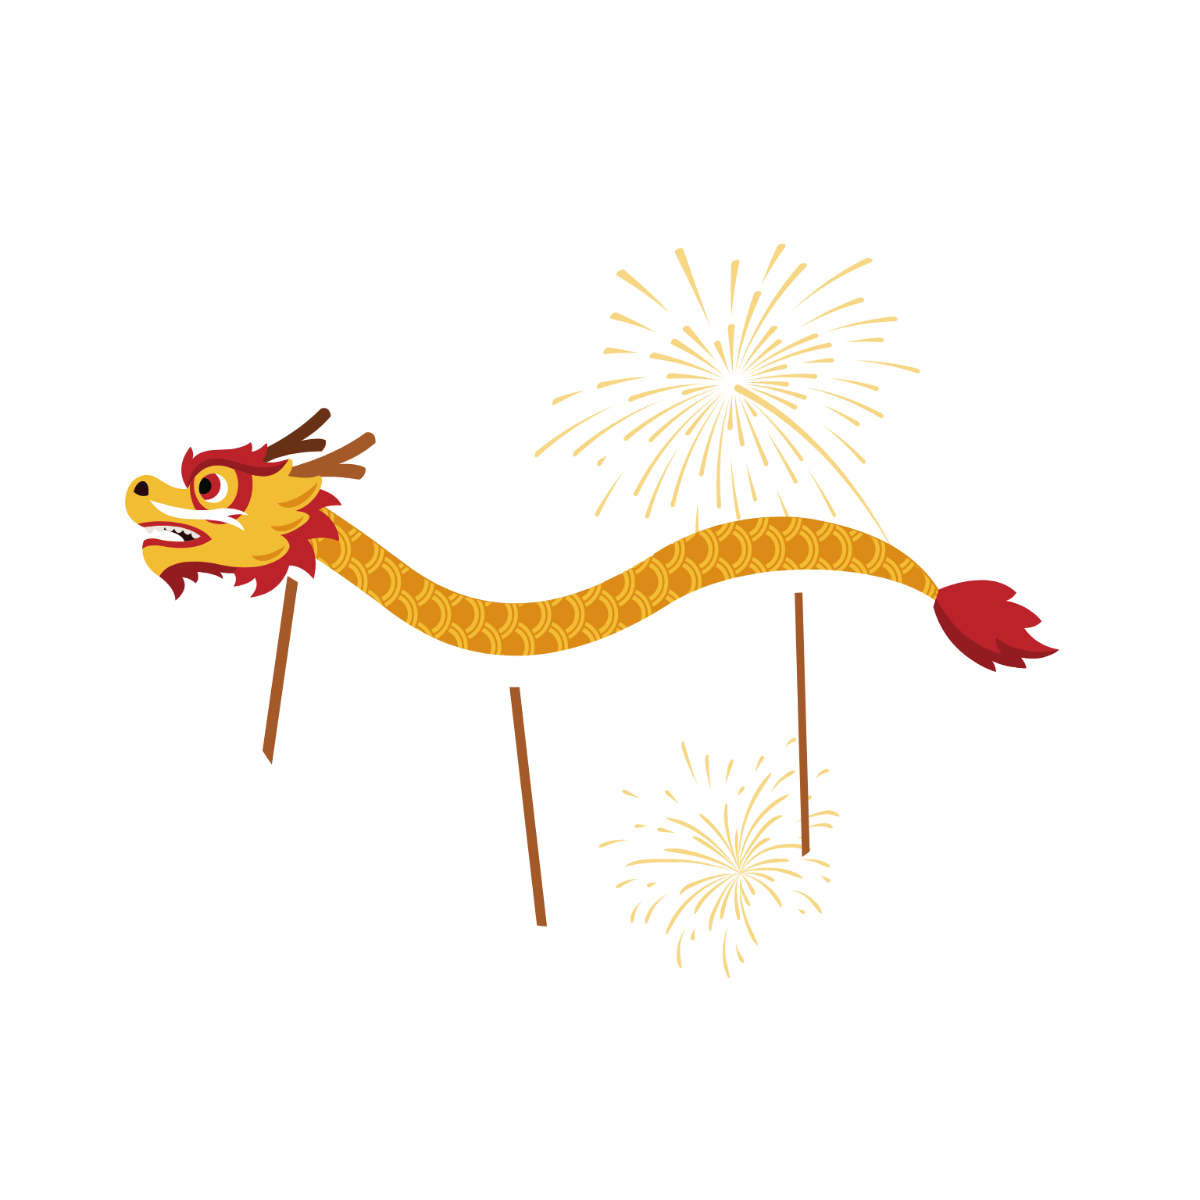 Chinese New Year Dragon Vector